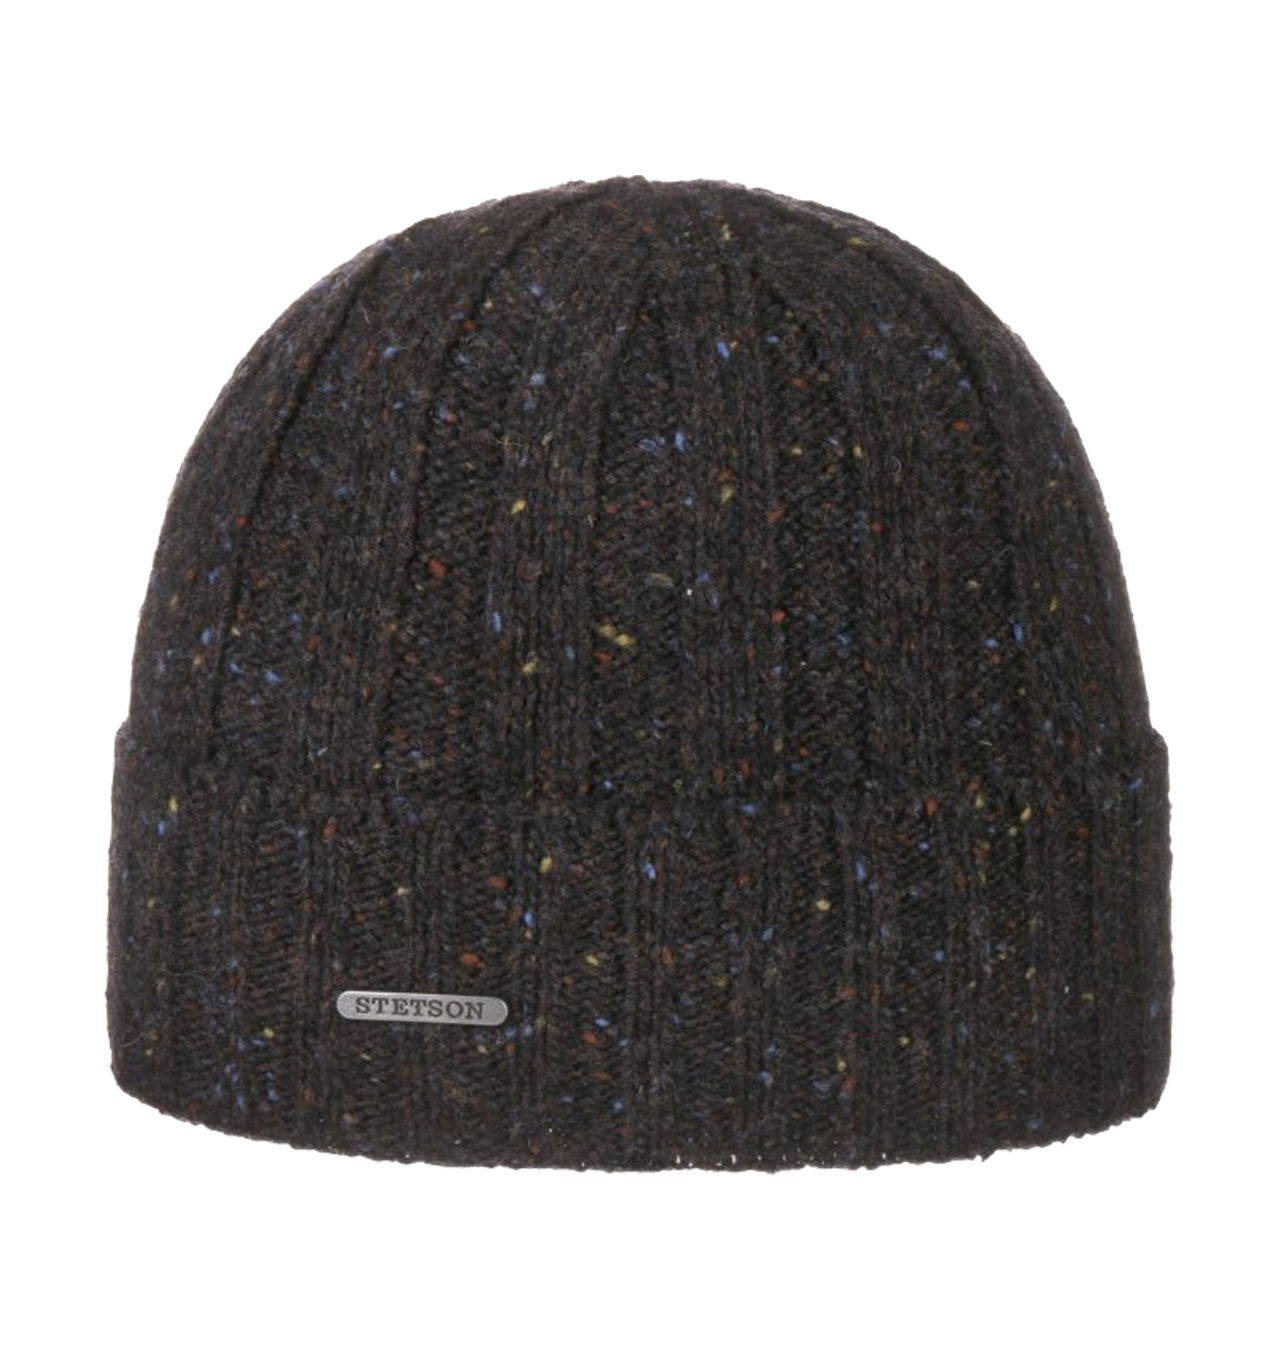 Stetson - Wisconsin Donegal Knit Beanie - Coal